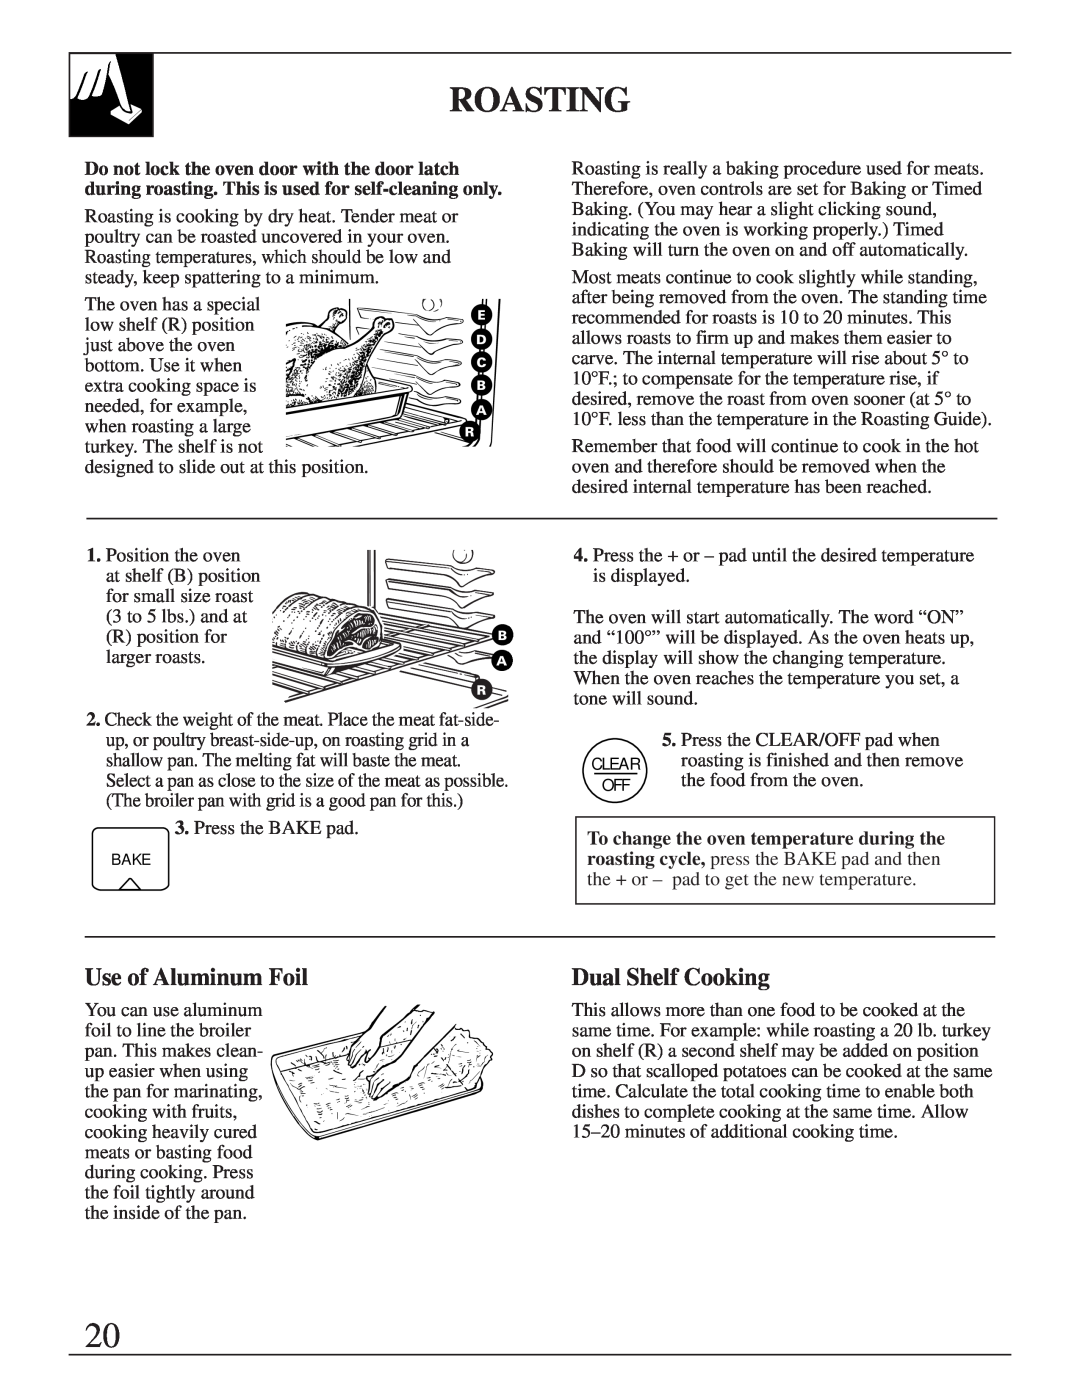 GE XL44 installation instructions Roasting, Use of Aluminum Foil, Dual Shelf Cooking 